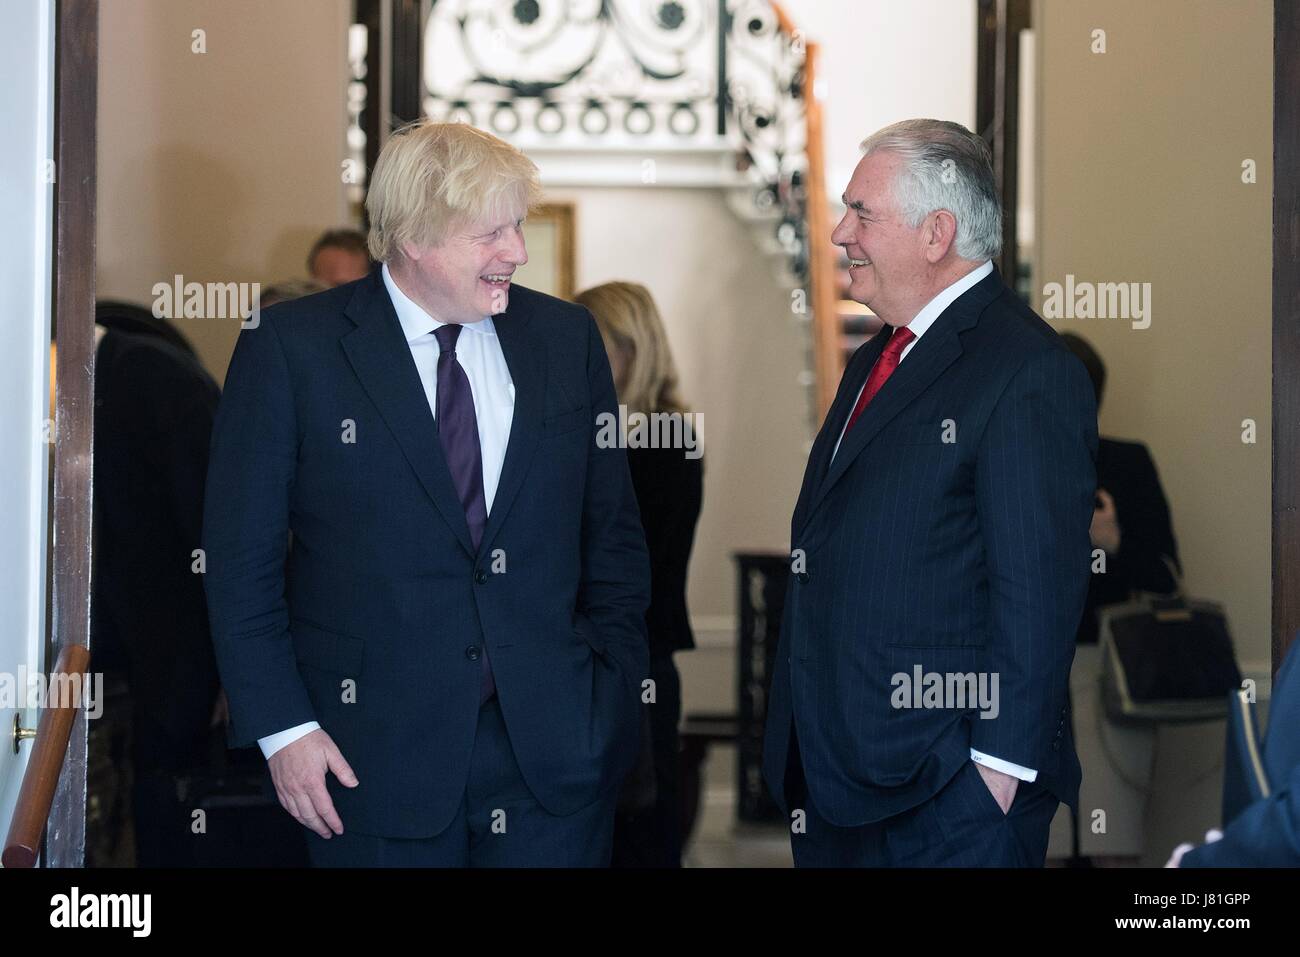 London, UK. 26th May, 2017. British Foreign Secretary Boris Johnson and U.S. Secretary of State Rex Tillerson, right, following a press conference at Carlton House May 26, 2017 in London, United Kingdom. Tillerson is in London to show support following the Manchester terror attack and reassure Britain following a series of leaks of shared intelligence. Credit: Planetpix/Alamy Live News Stock Photo